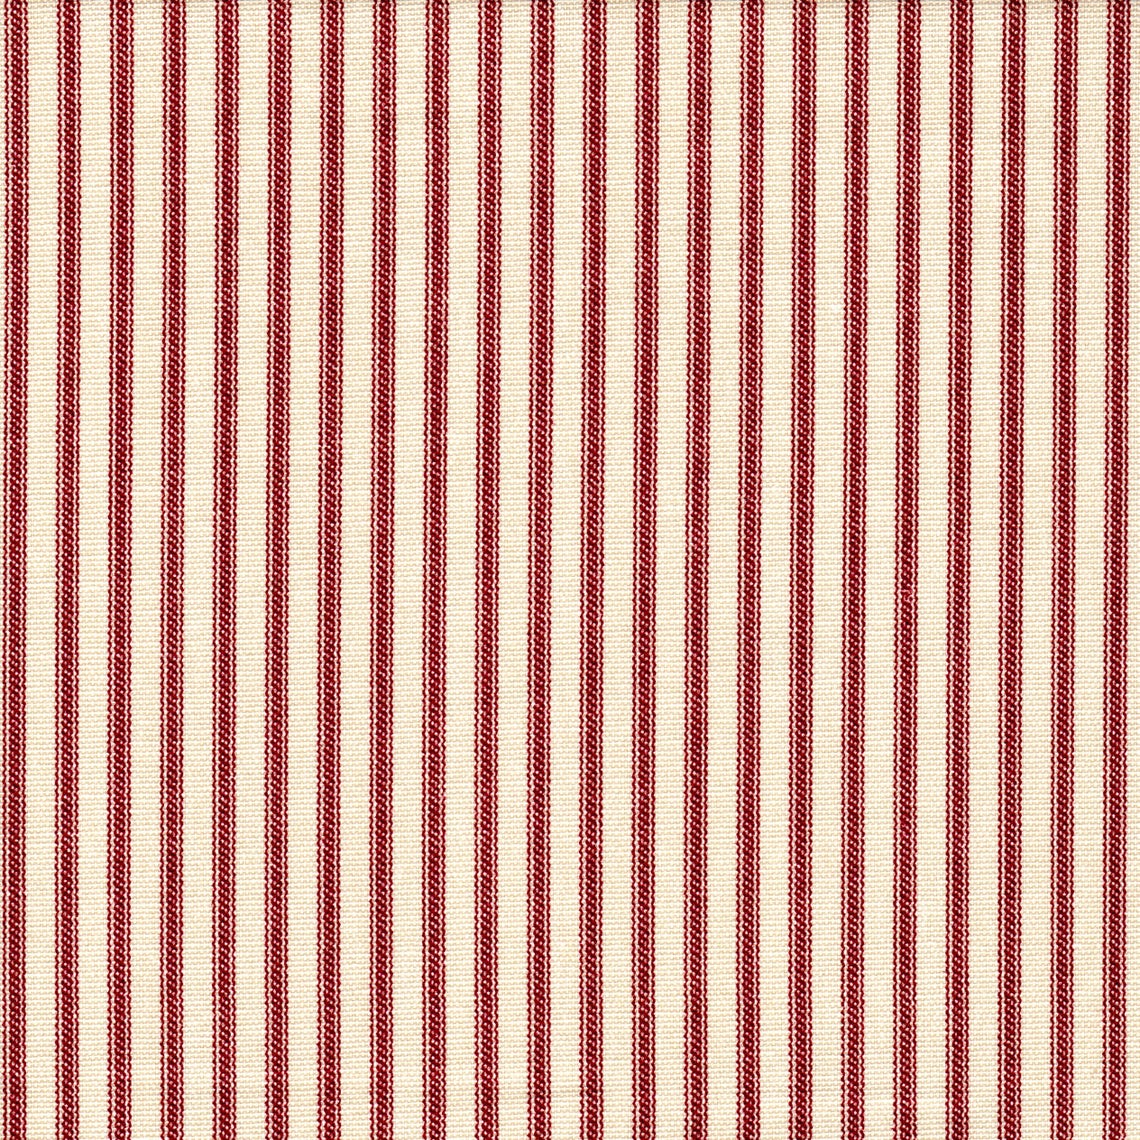 scallop valance in farmhouse red traditional ticking stripe on beige